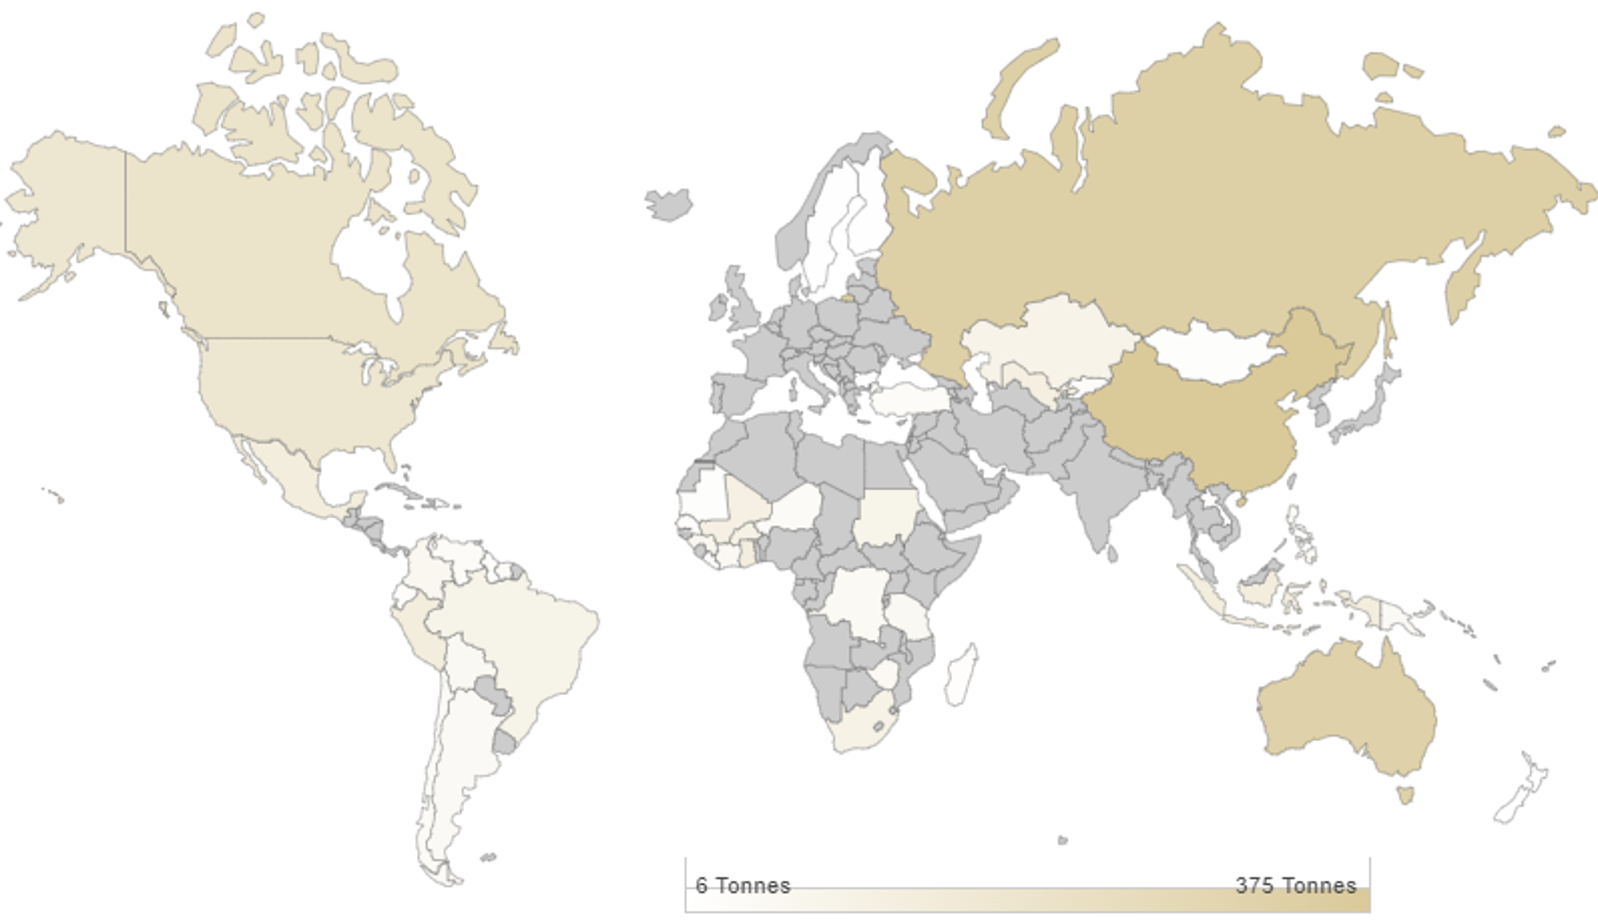 map of gold production by country color coded